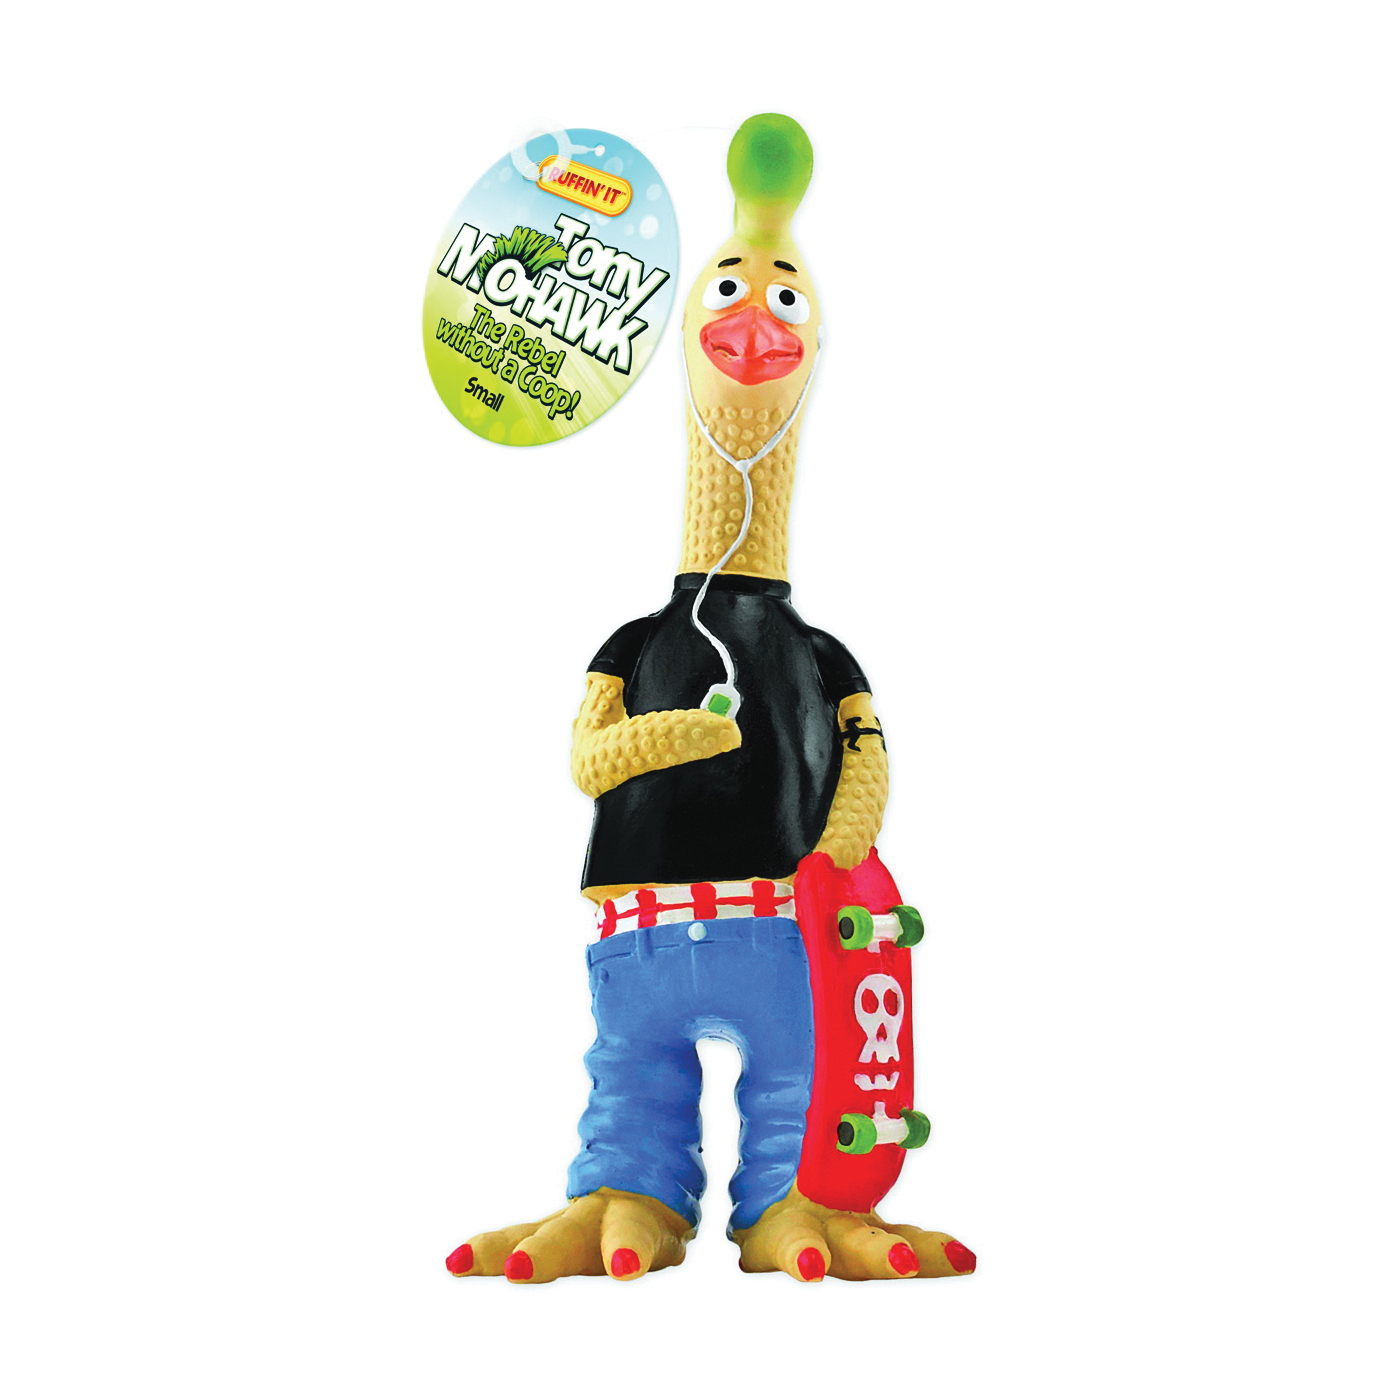 80535 Dog Toy, S, Tony Mohawk Chicken, Rubber